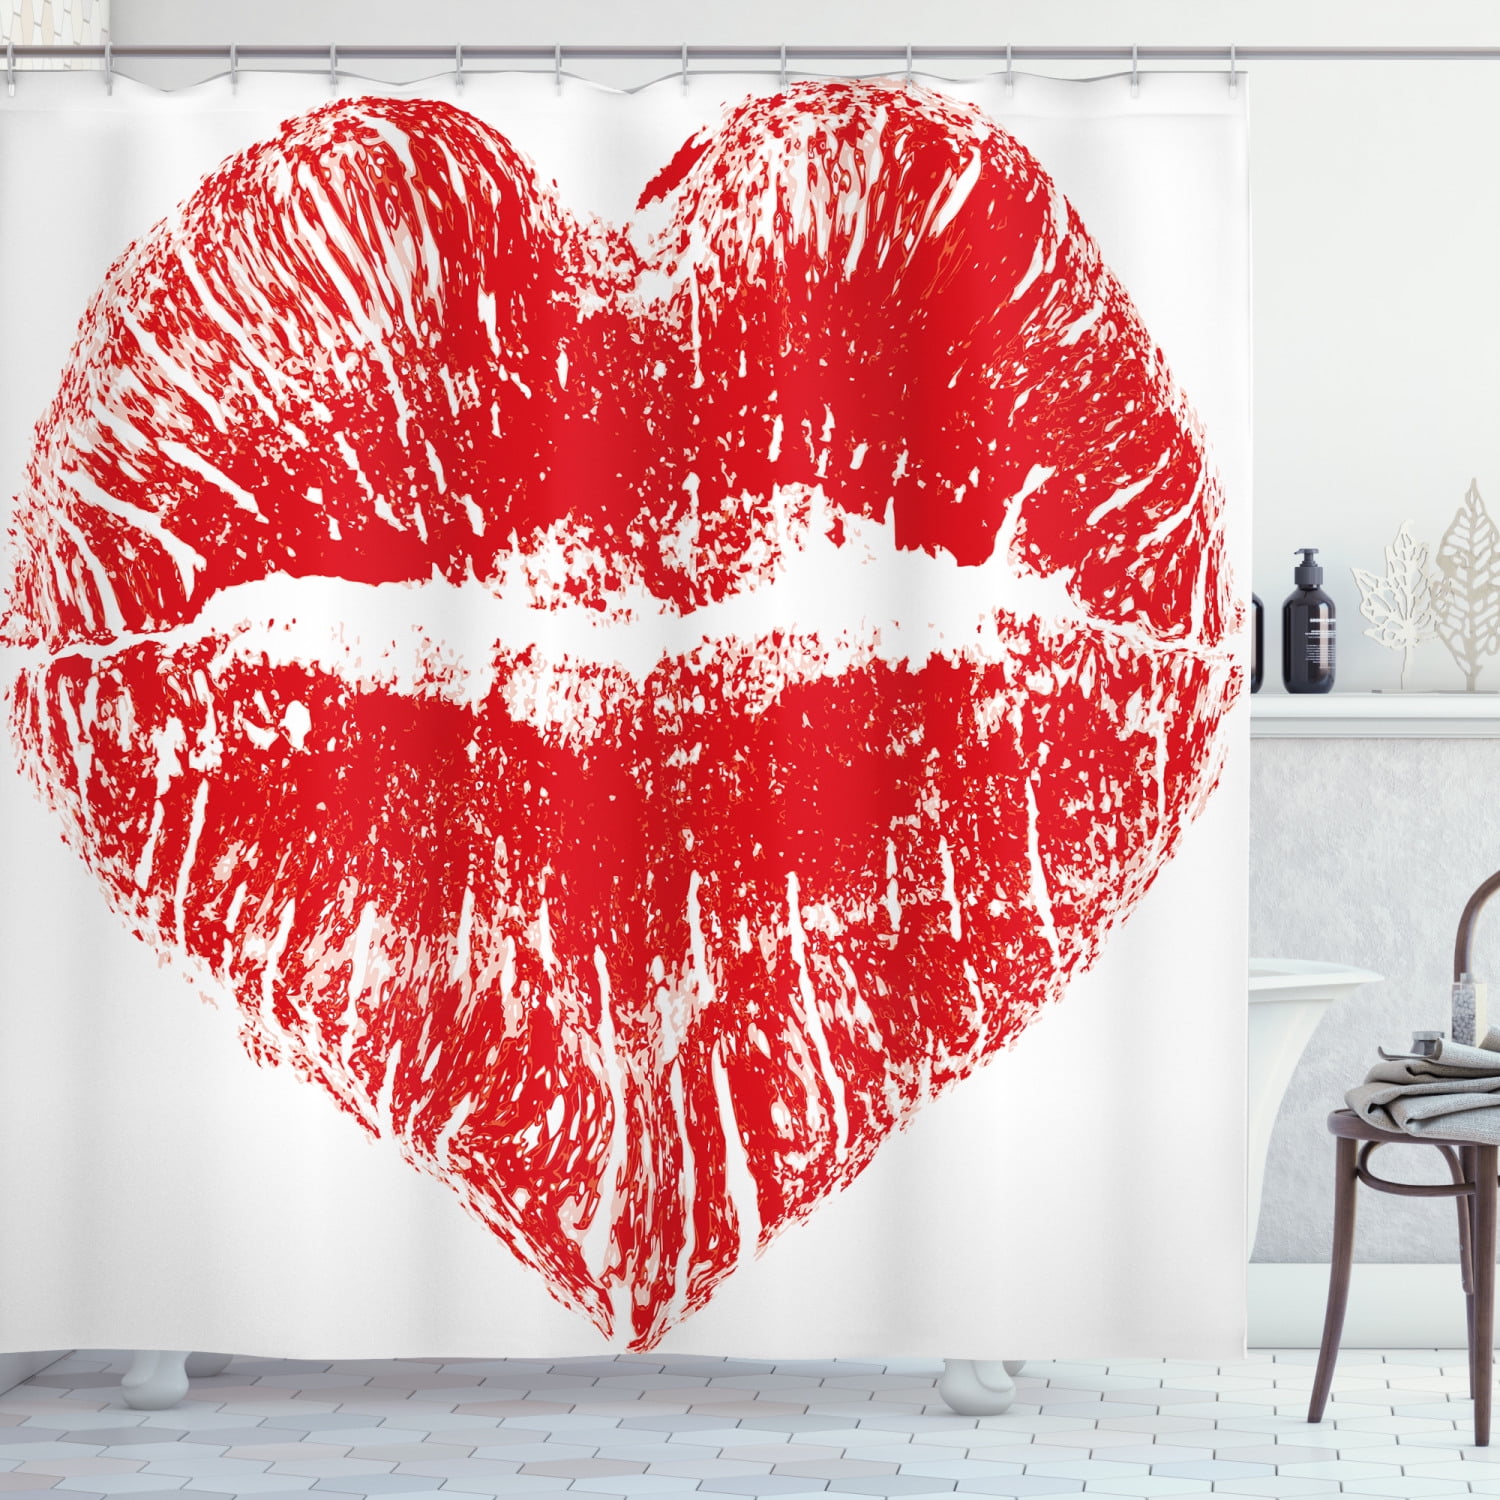 Kiss Shower Curtain, Red Lipstick Mark in the Shape of a Heart ...